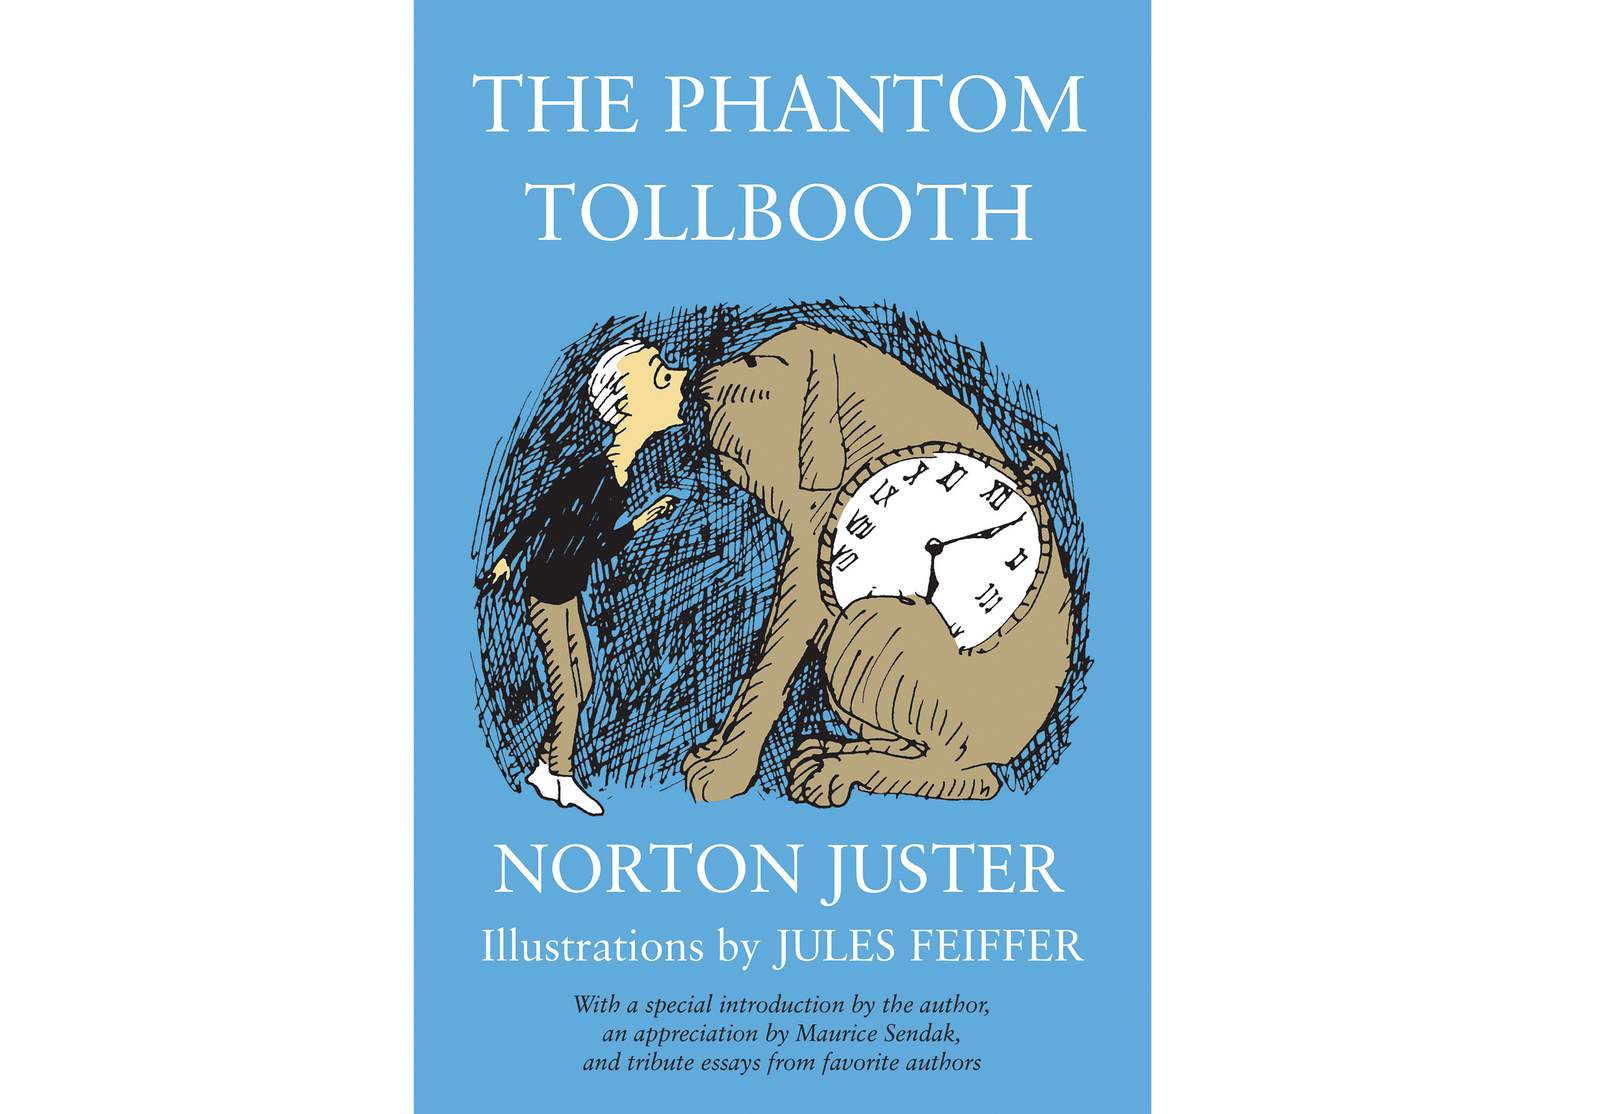 Norton Juster, 'The Phantom Tollbooth' author, dead at 91